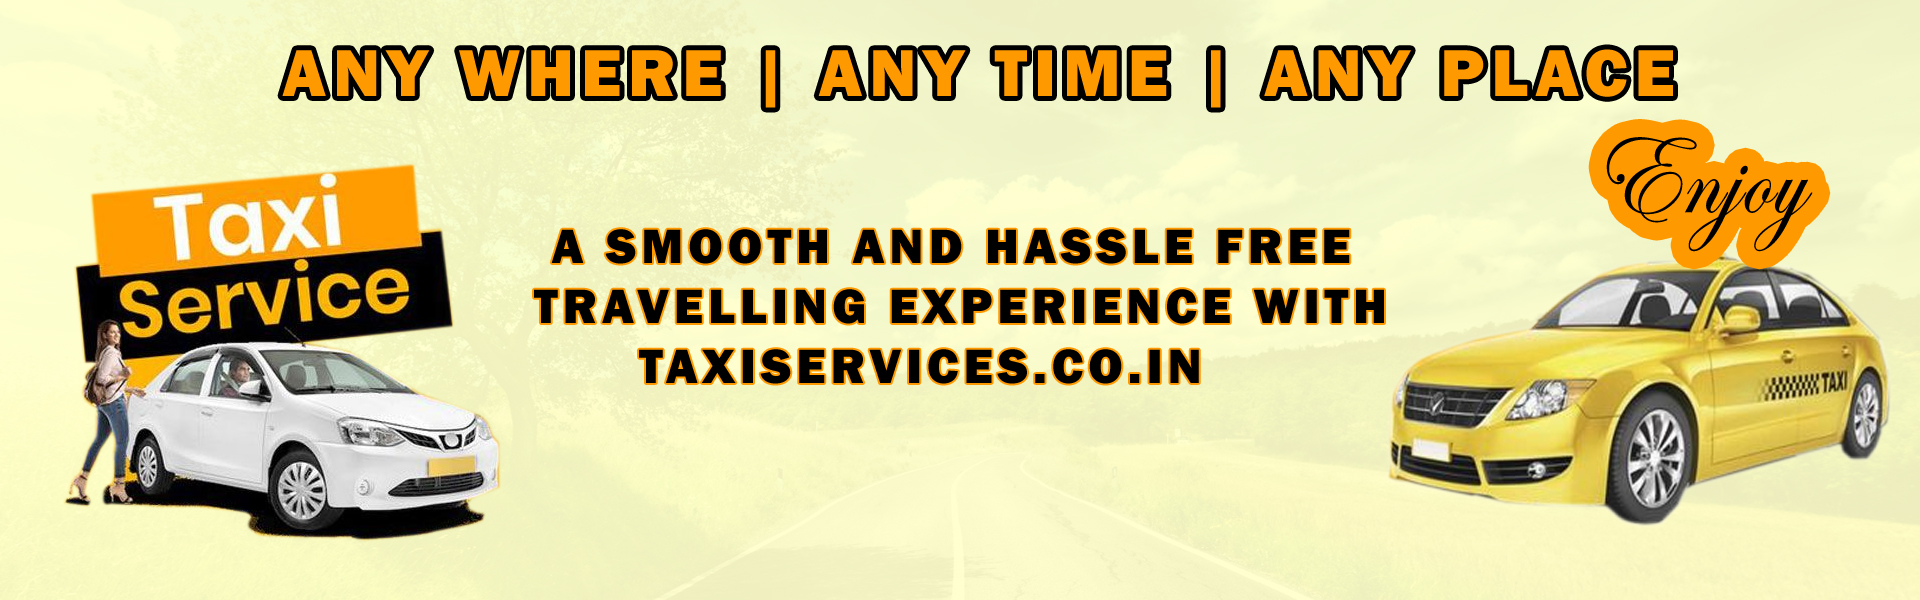 Taxi Booking Banner